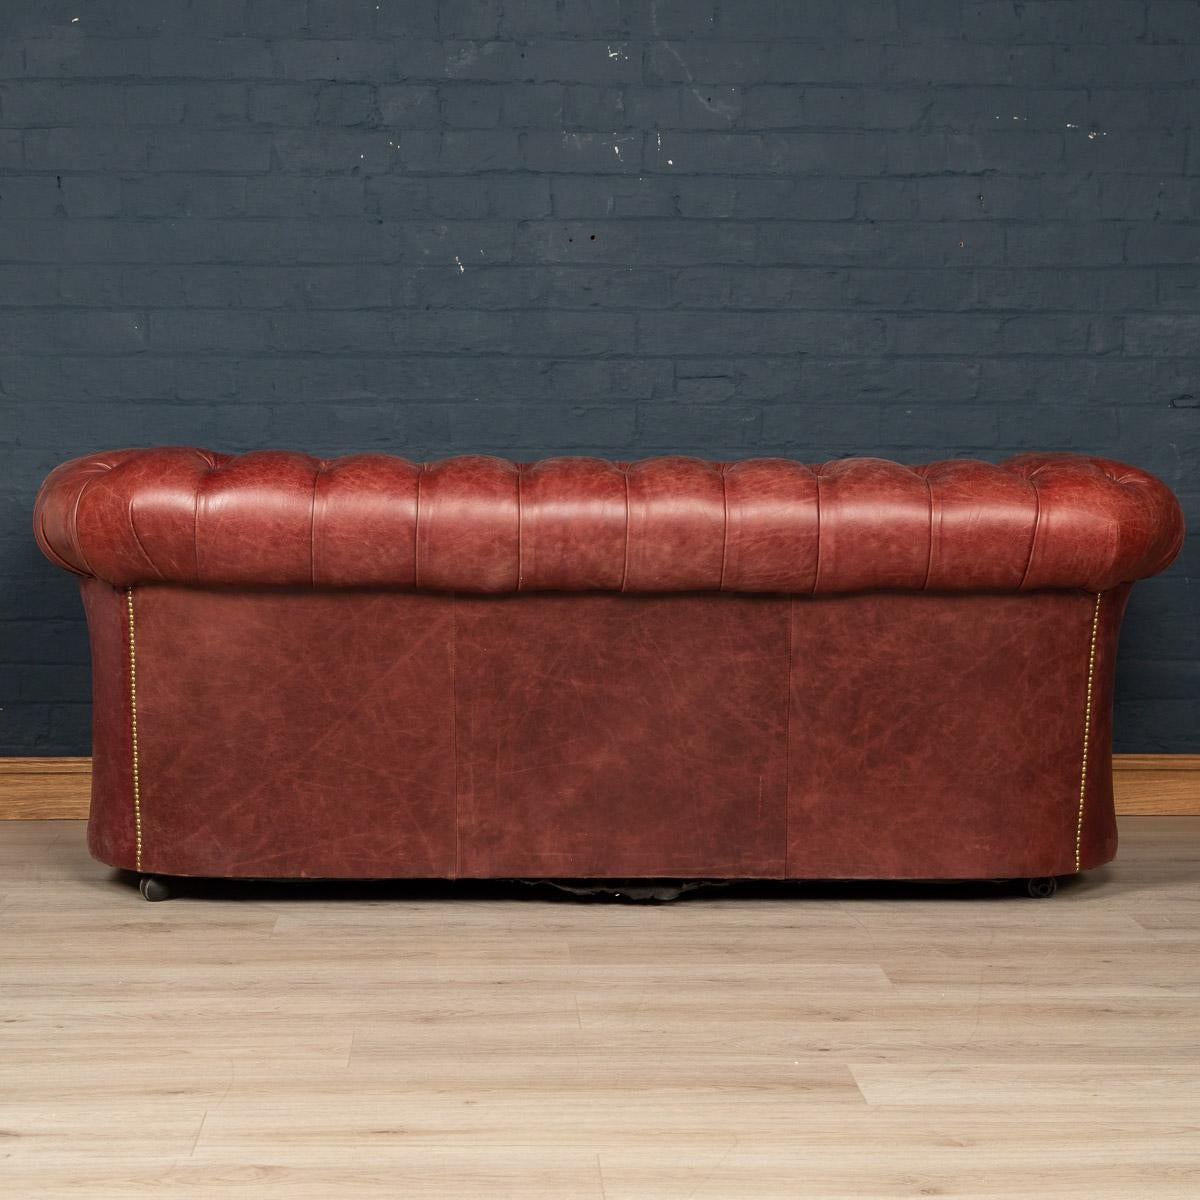 English 20th Century Chesterfield Leather Sofa With Button Down Seat